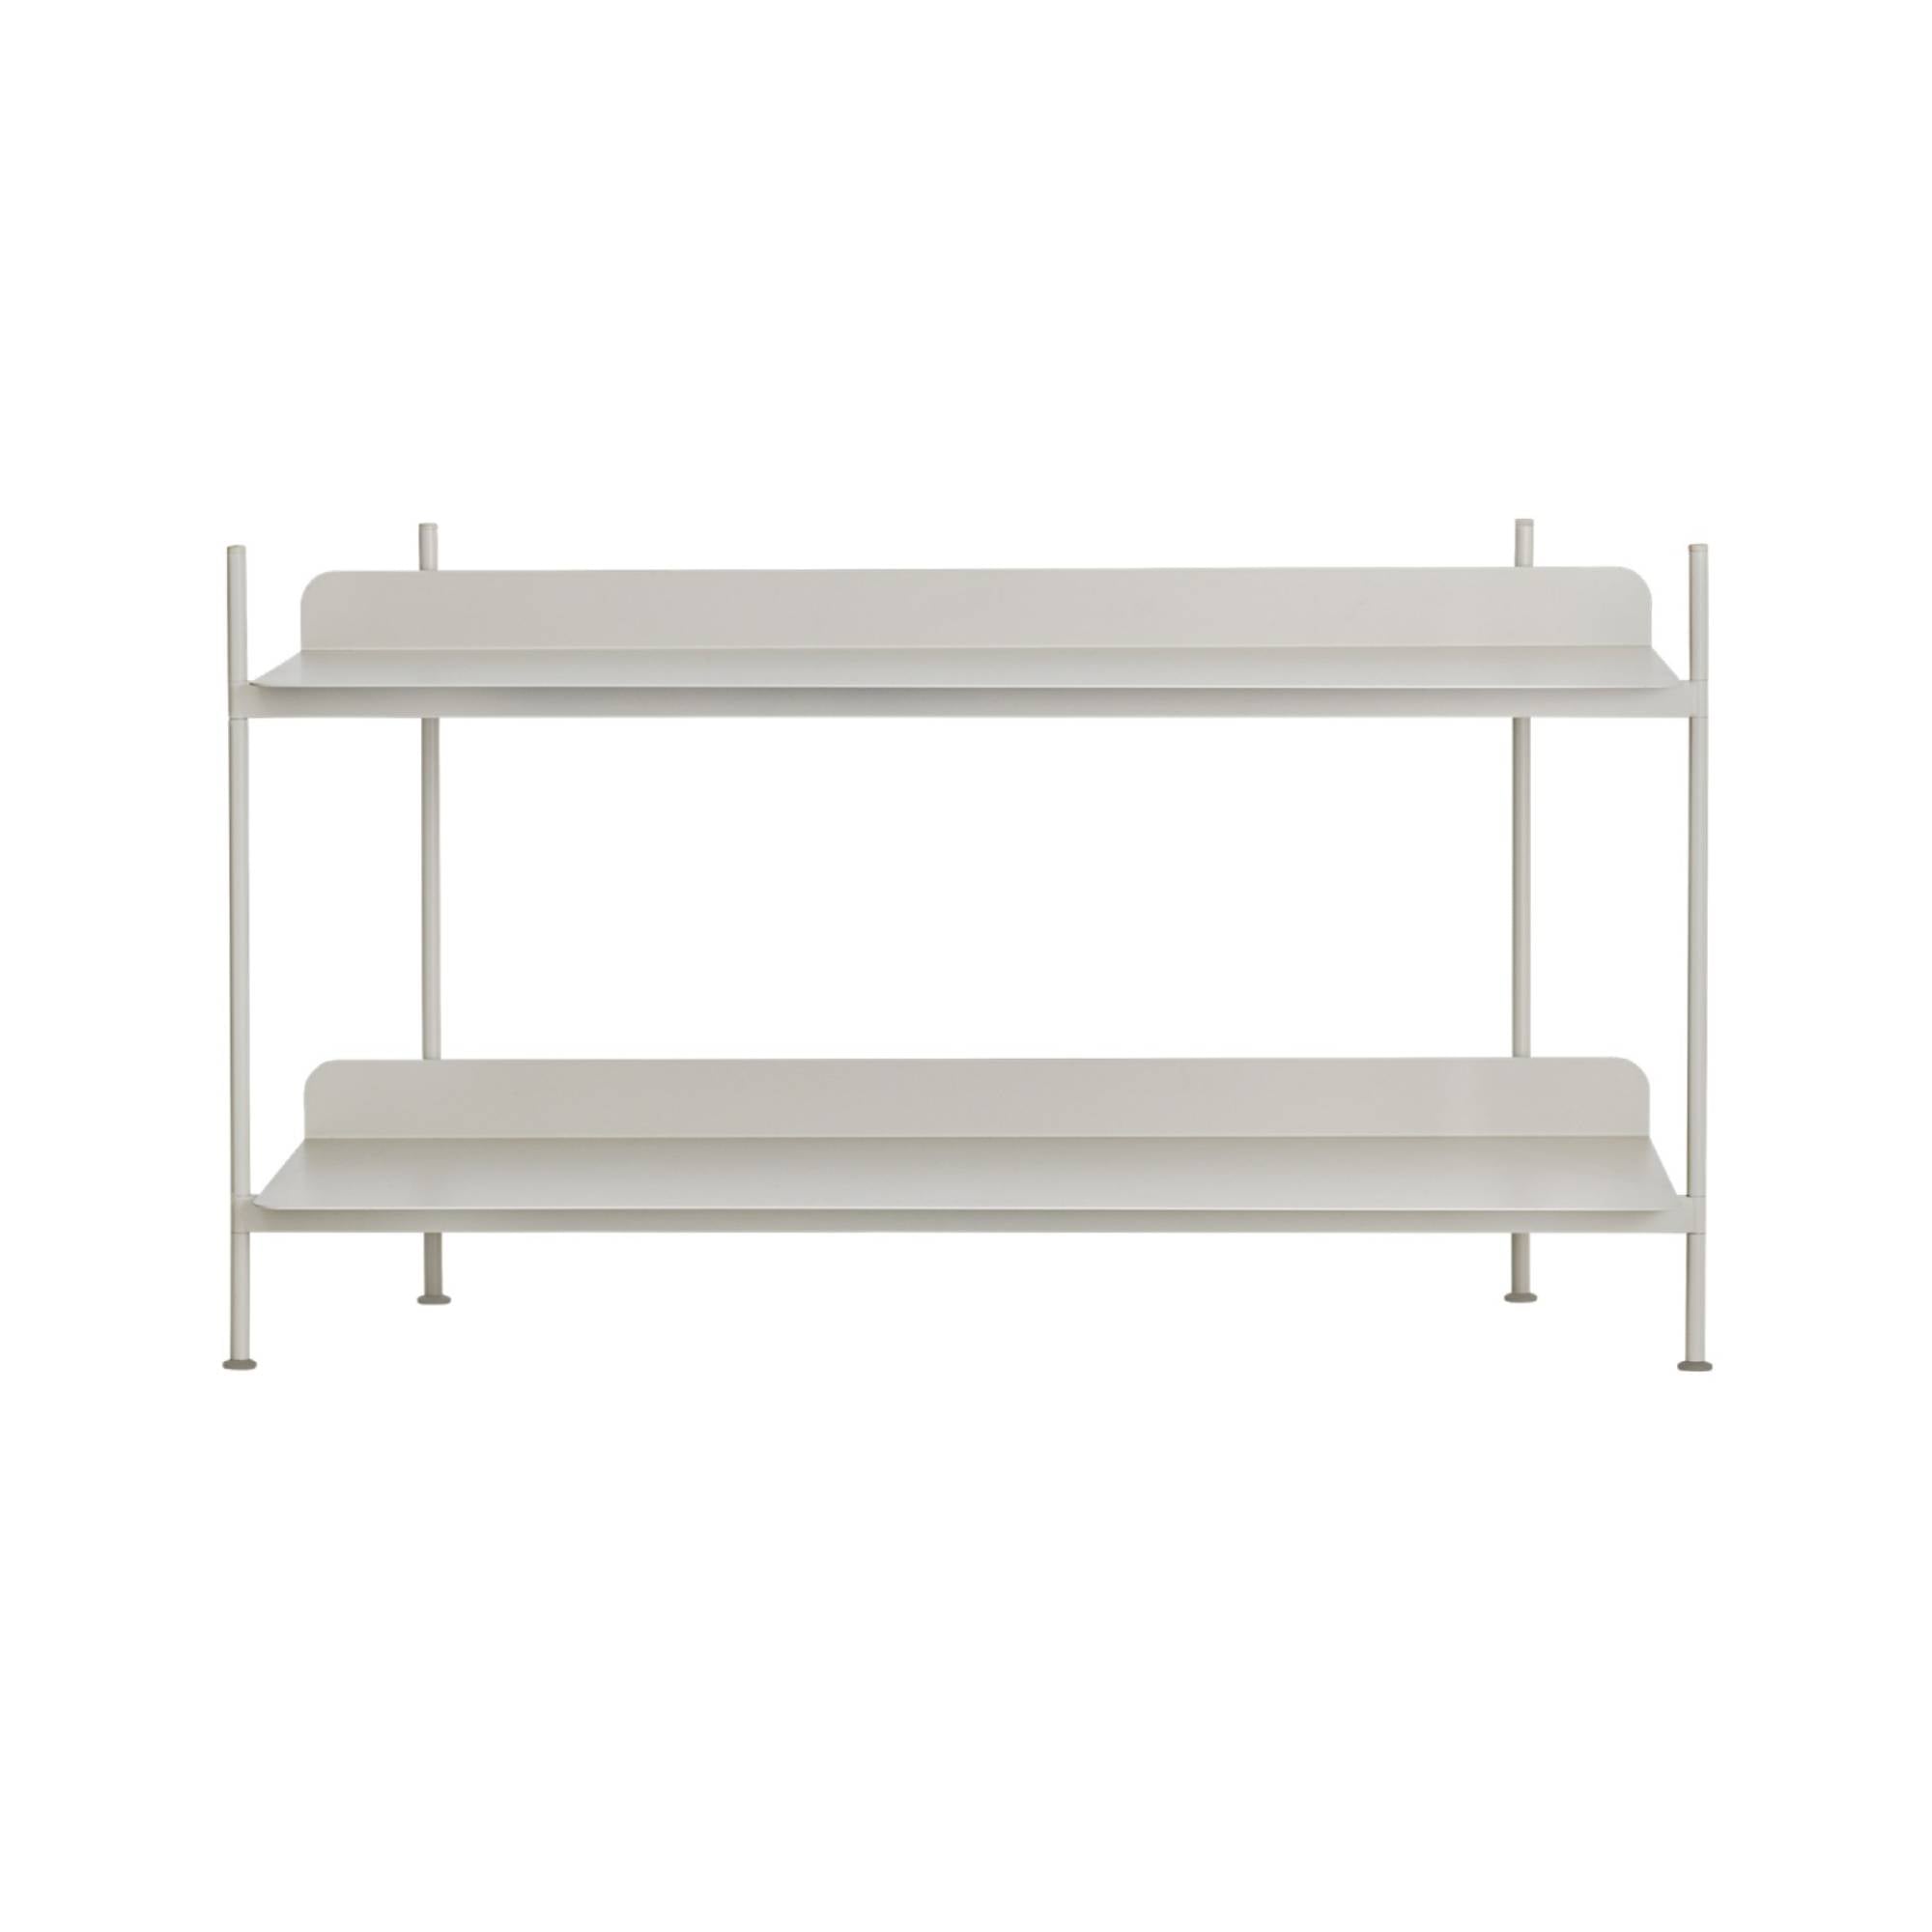 Compile Shelving System: Configuration 1 + Grey